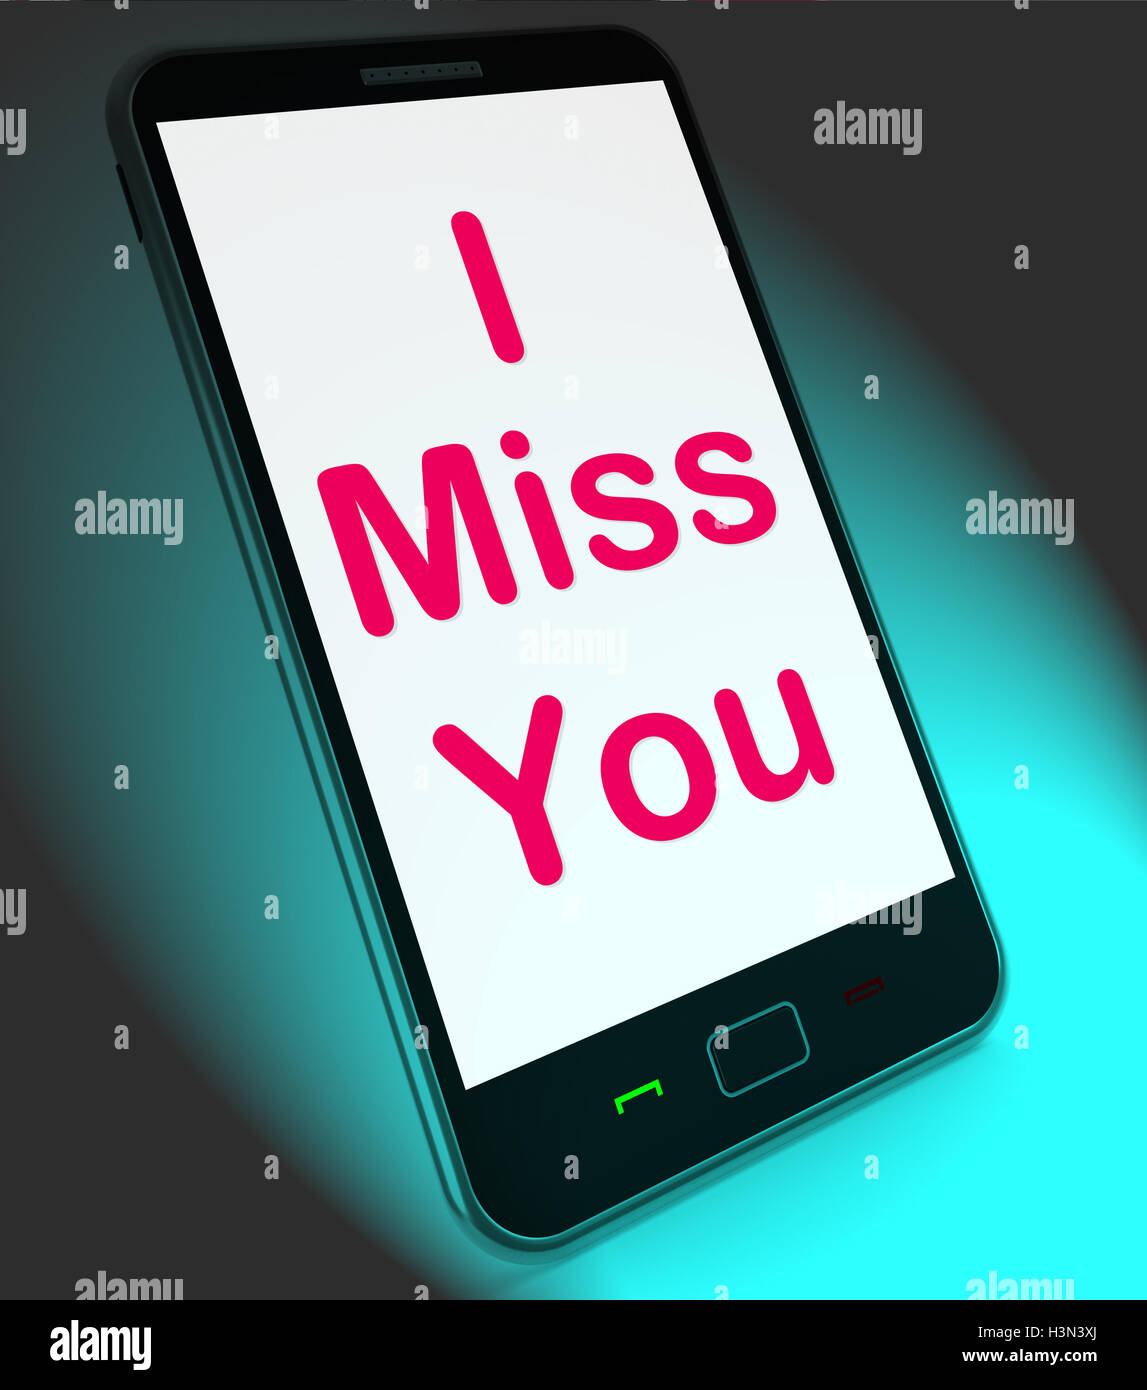 I Miss You On Mobile Means Sad Longing Relationship Stock Photo